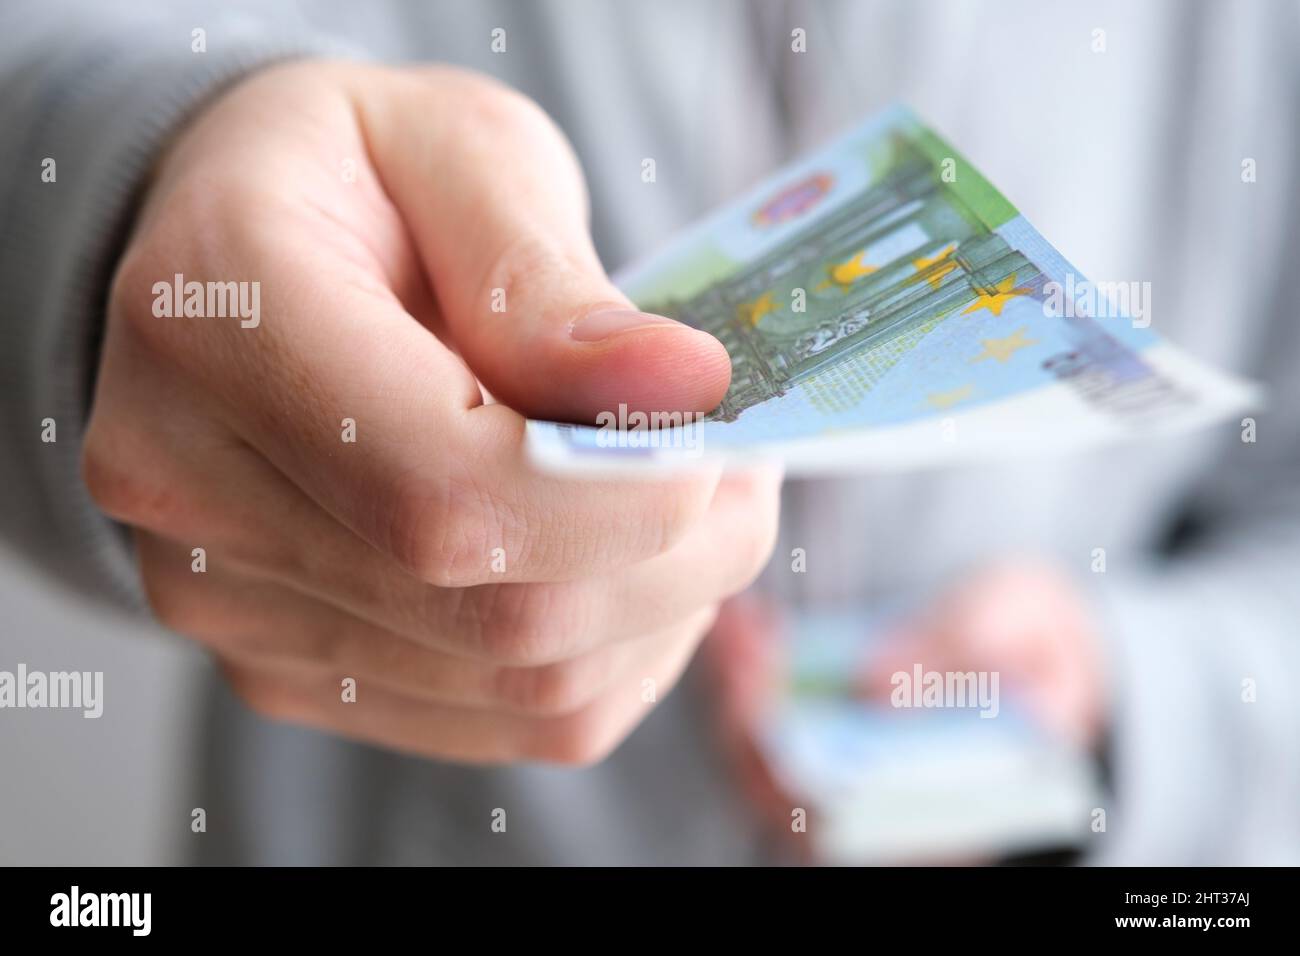 Male hand giving only one money banknote for a payment on white background, close up of caucasian adult man handing out European Union currency, euro. Stock Photo